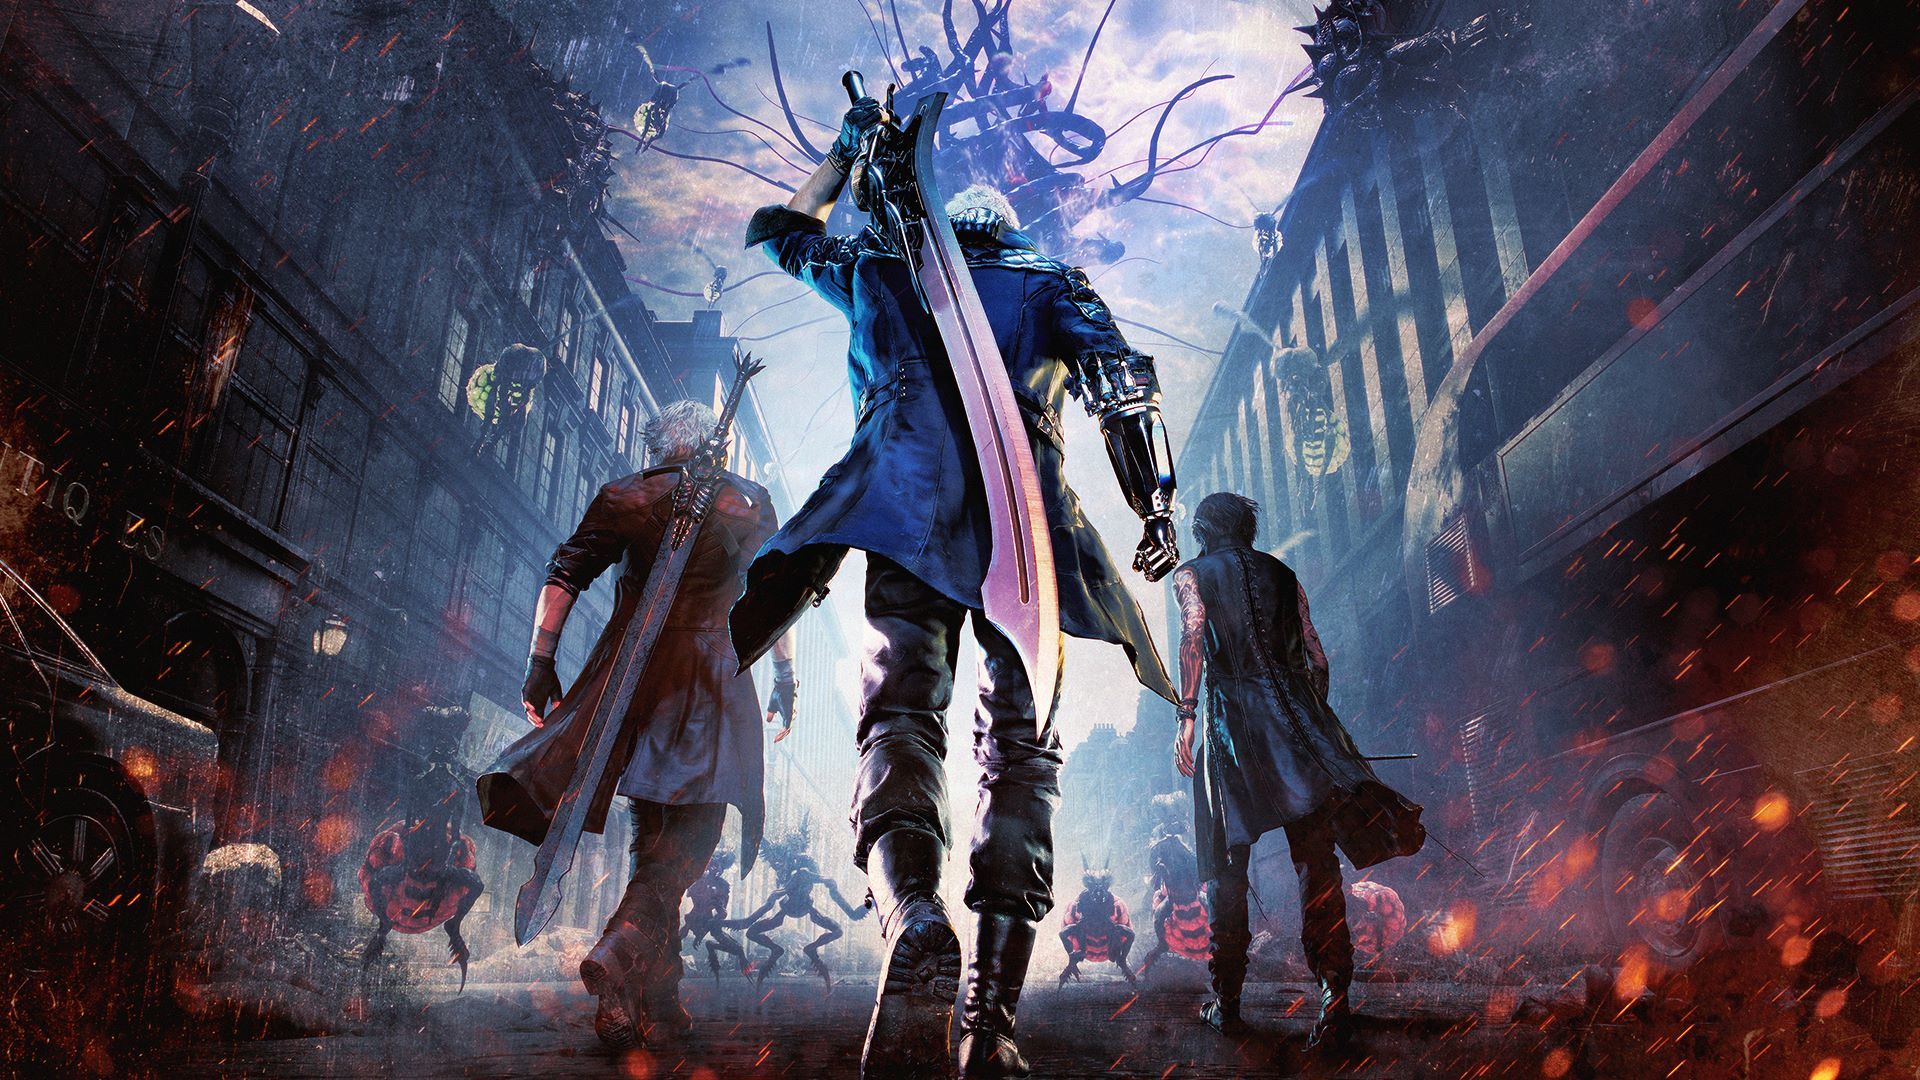 devil may cry 5 weapon list